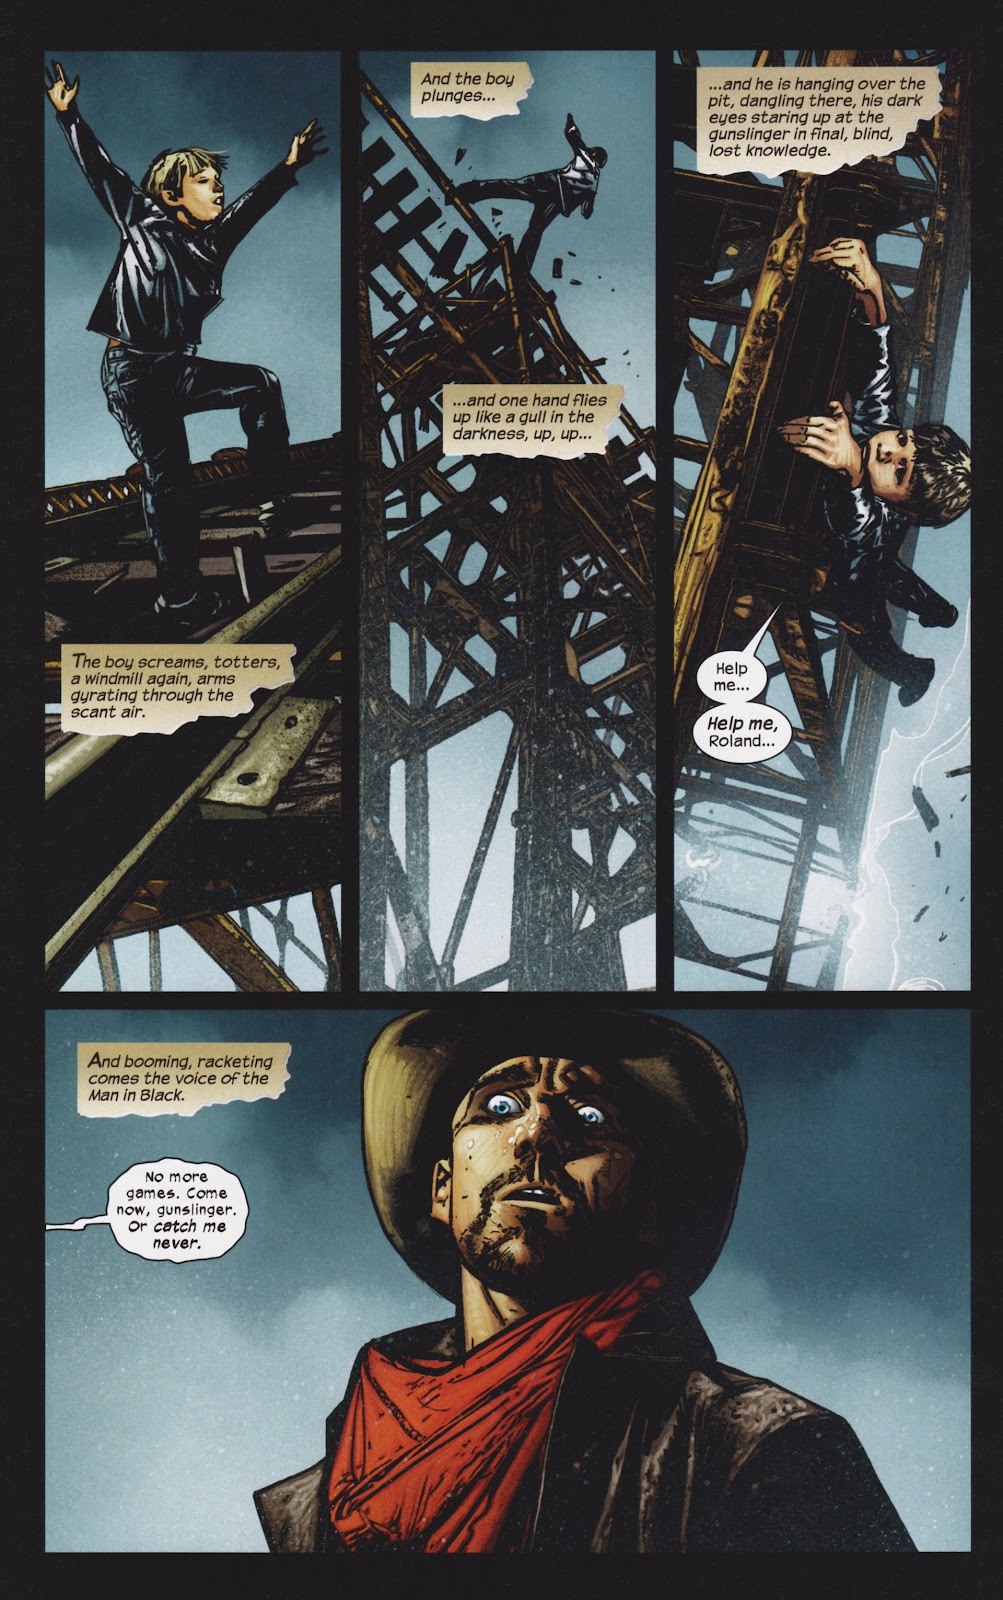 Dark Tower: The Gunslinger - The Man in Black issue 4 - Page 21